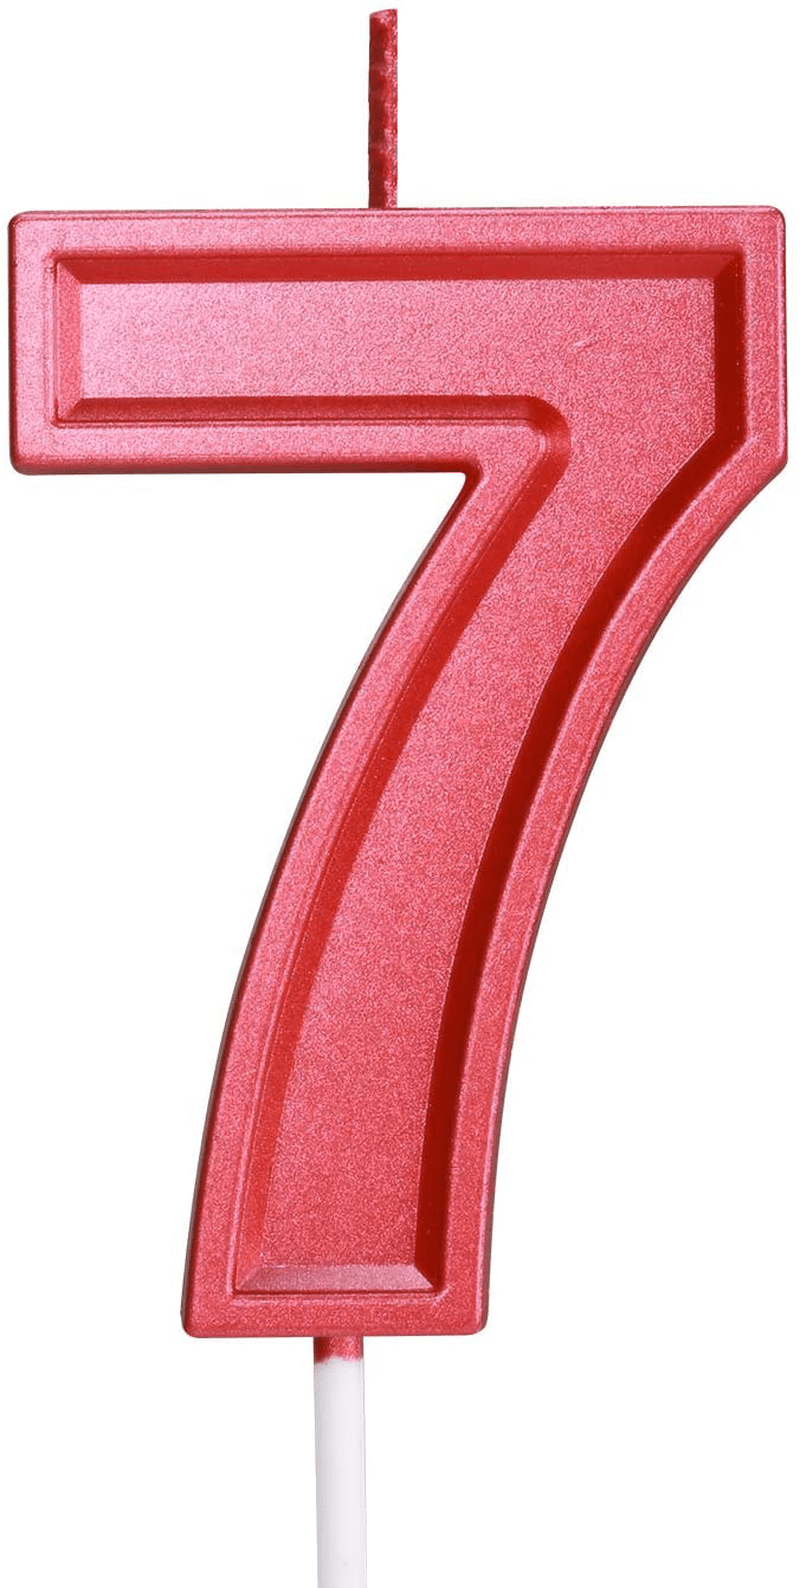 Birthday Candle Numbers Red Glitter Happy Birthday Numeral for Weddings, Reunions, Theme Party Perfect Baby’s Pet’s Birthday Cake Candle (Red, 7)